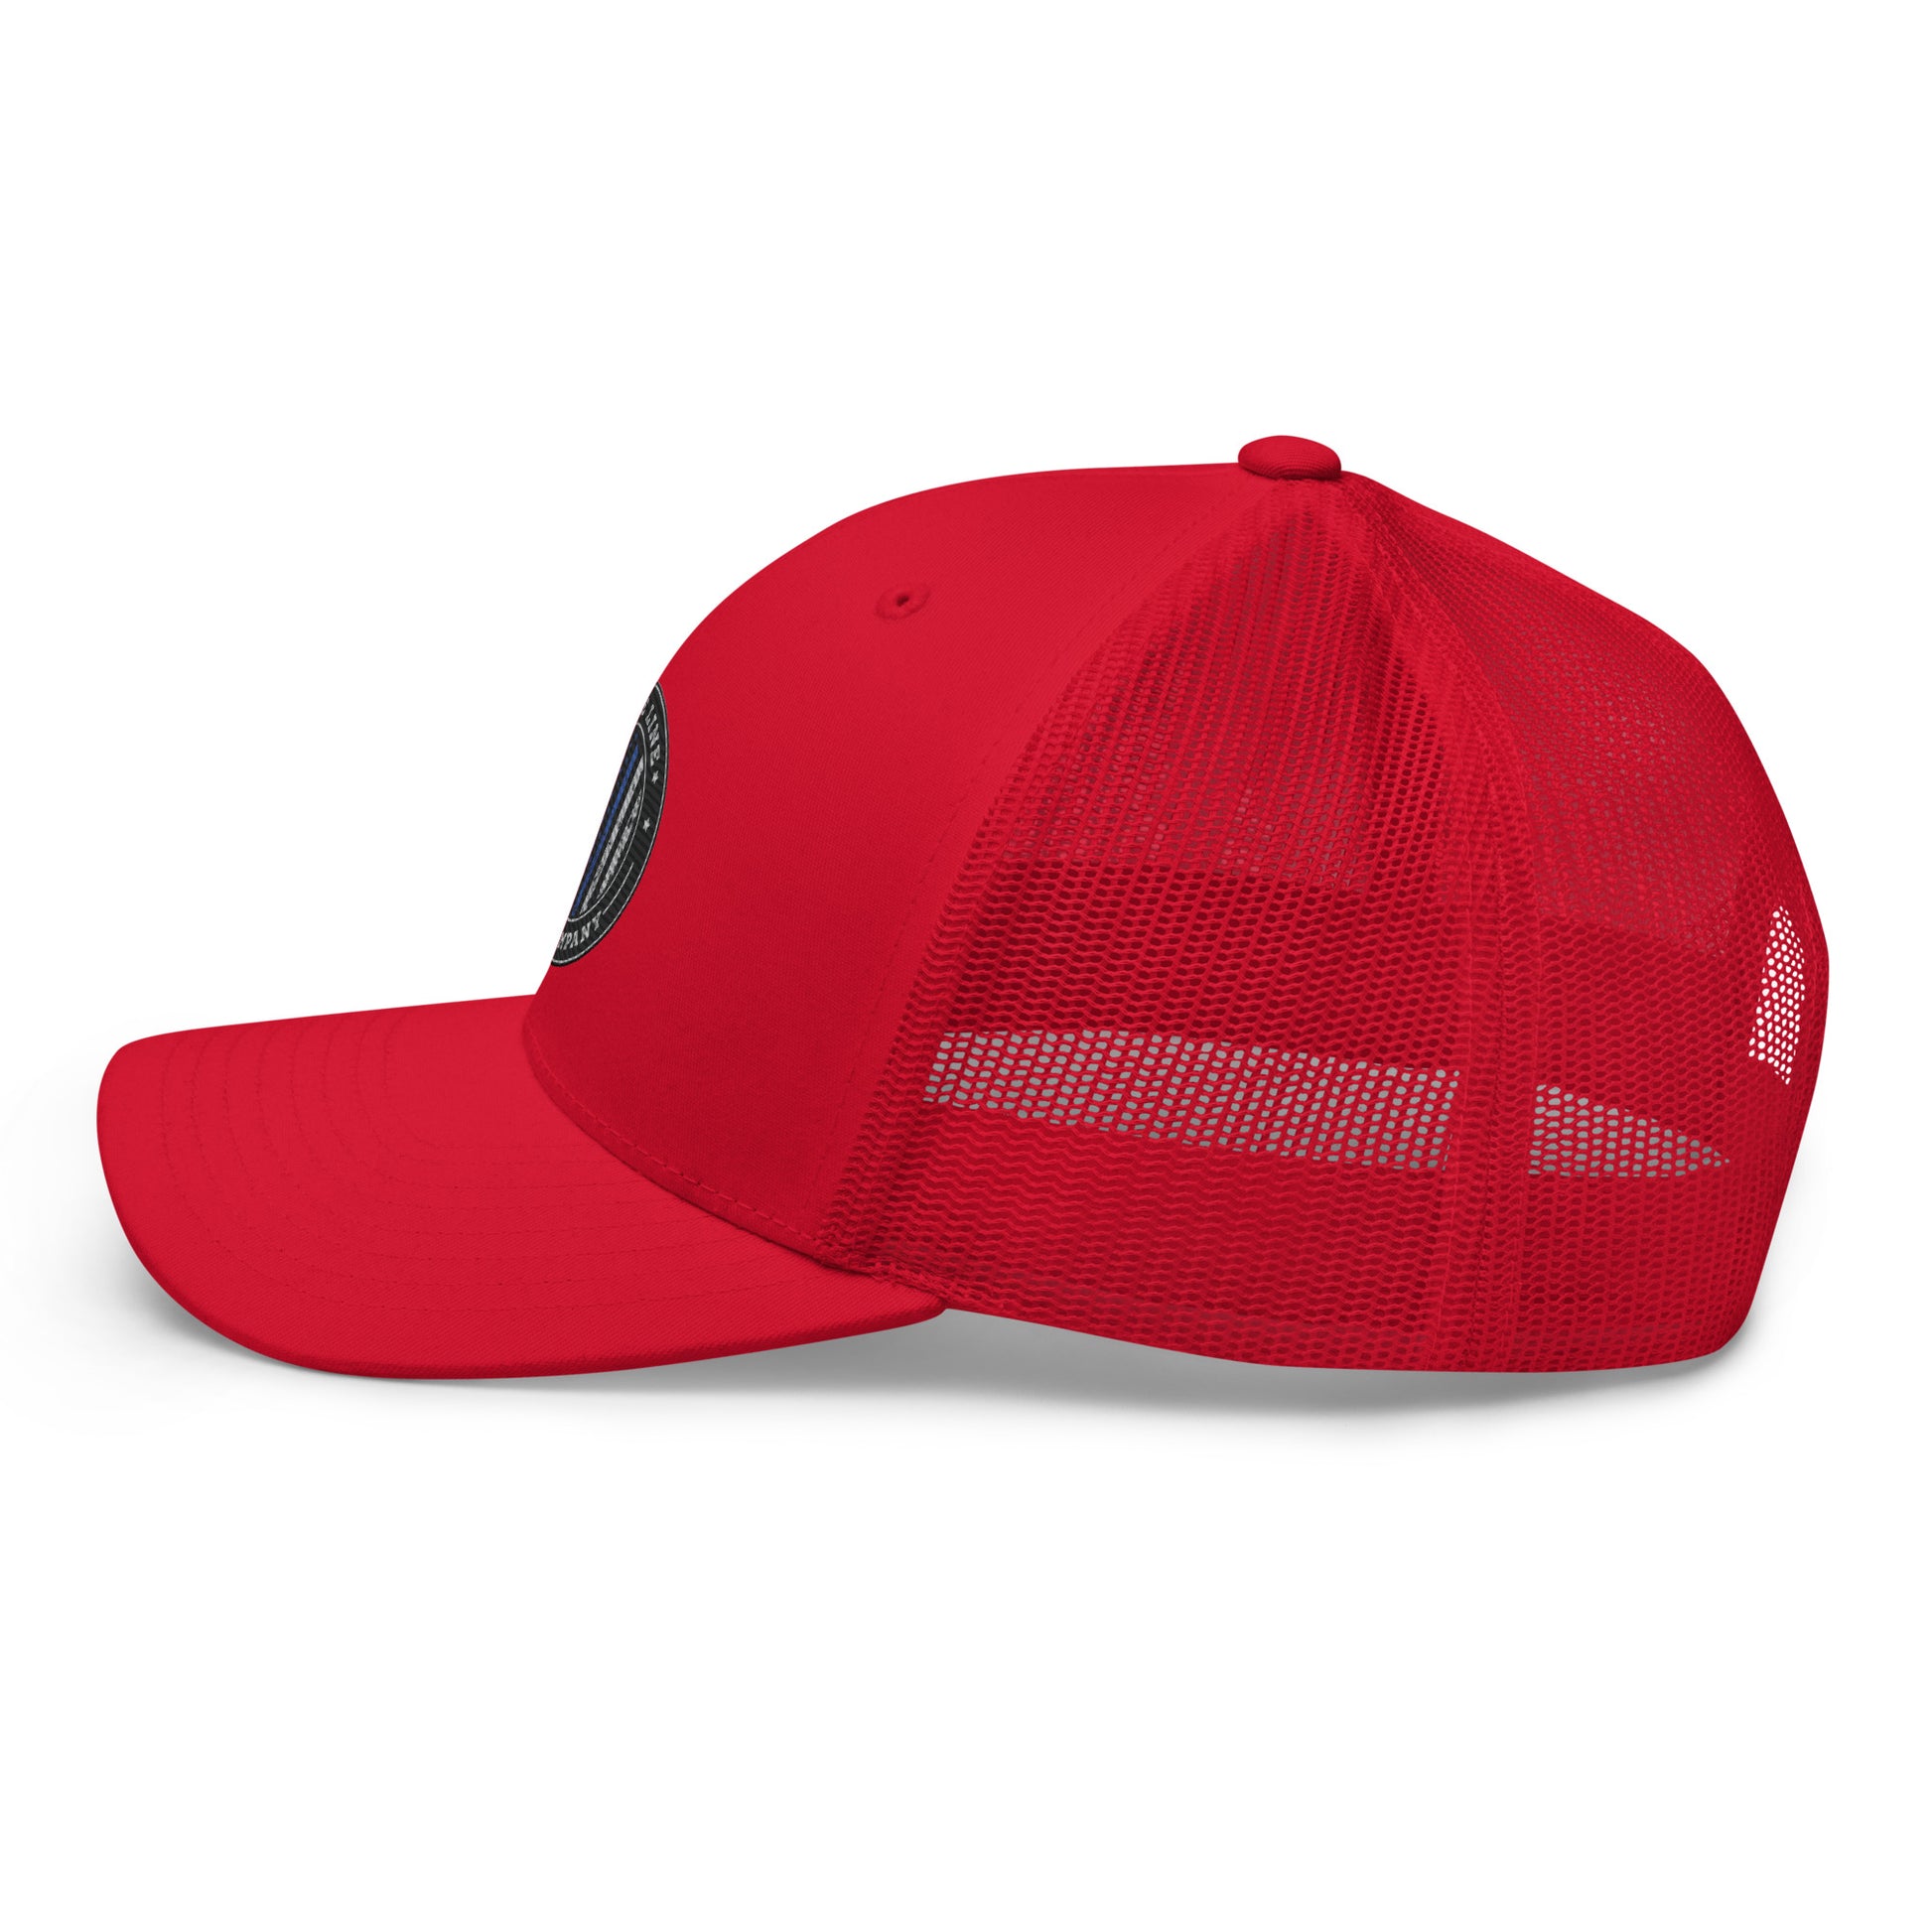 Boston Red Sox Cap Logo (1946) - Red B with white outline on navy